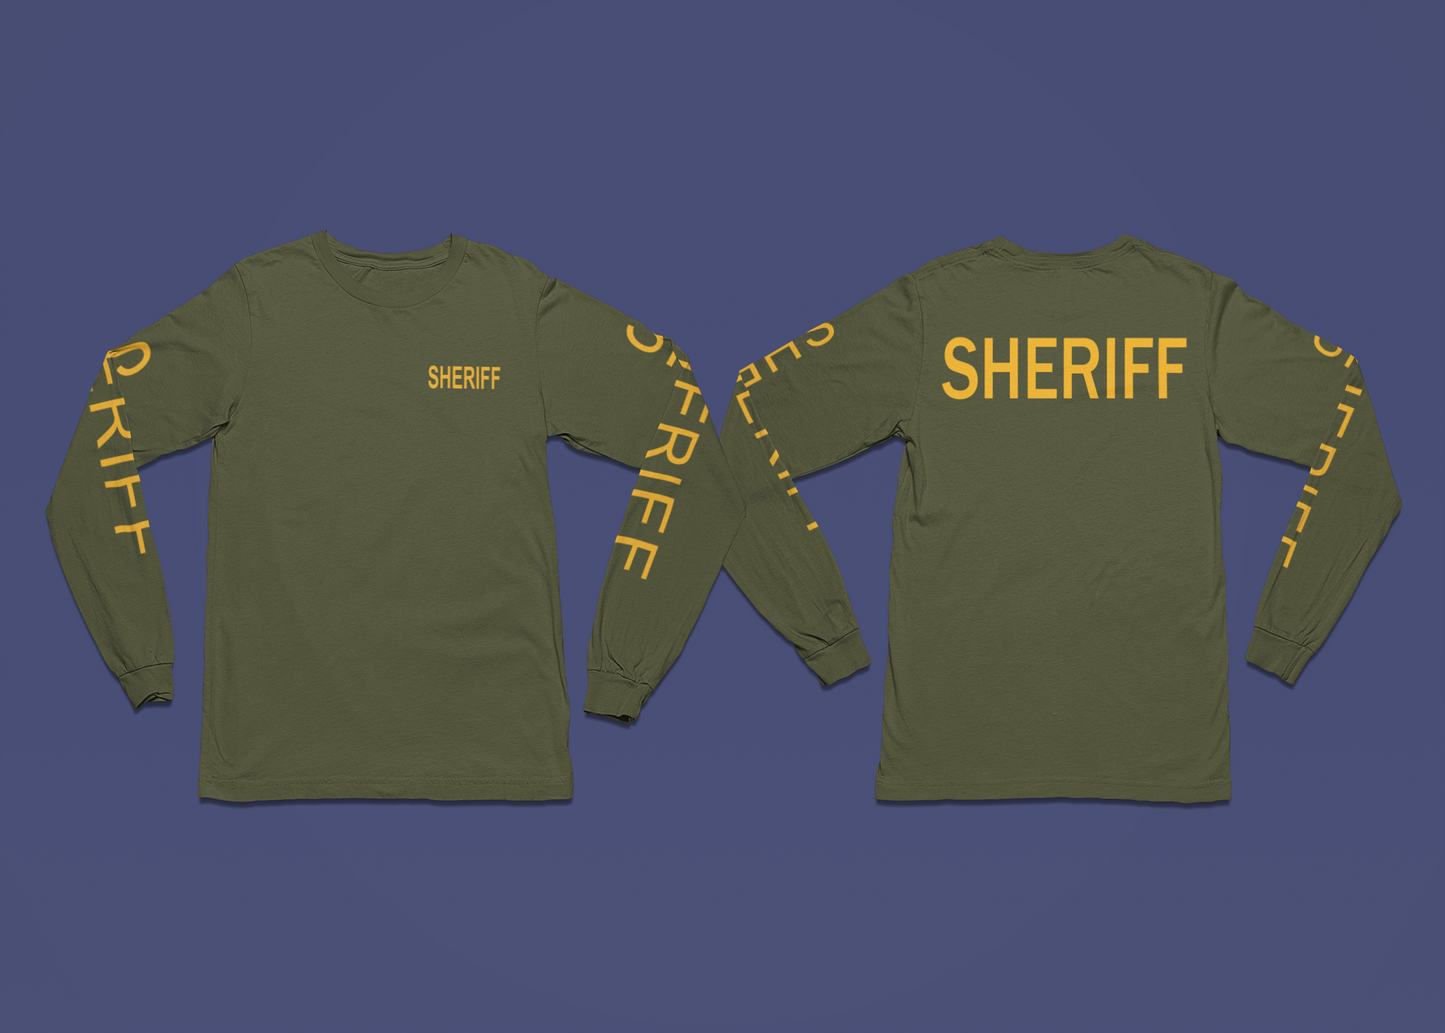 Sheriff Long-Sleeved Shirt with Modern Font